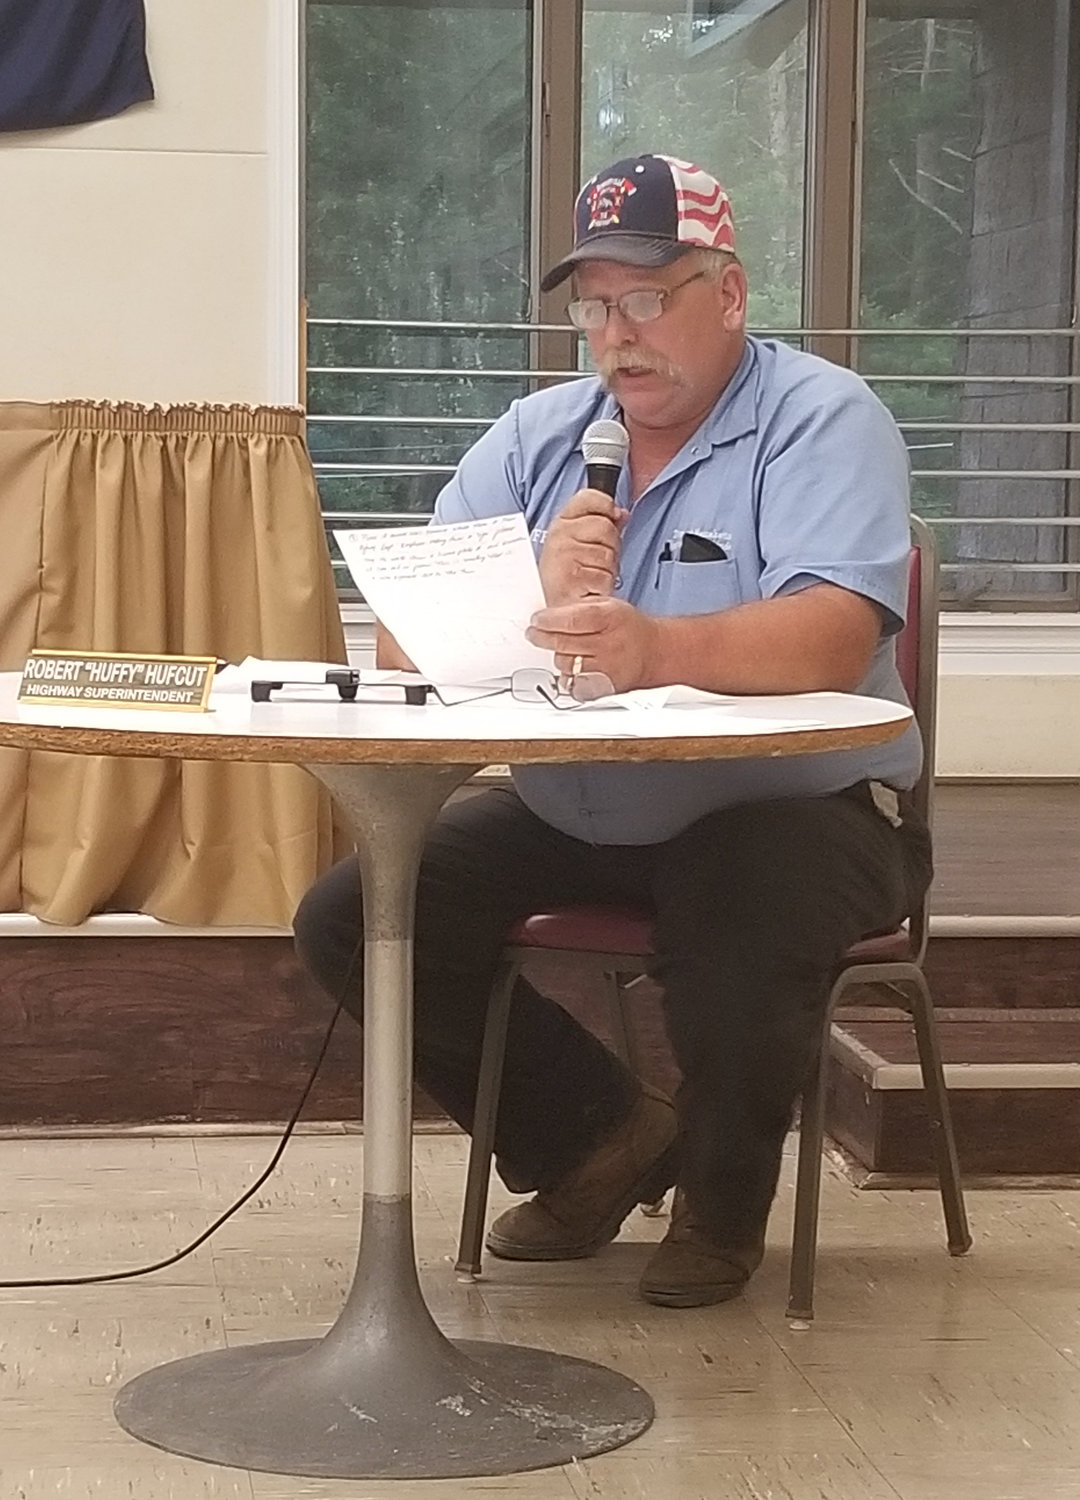 Town of Mamakating Highway Superintendent Rob Hufcut deliv- ered his report during a recent town board meeting. Hufcut has been imploring motorists to drive safely through work zones.